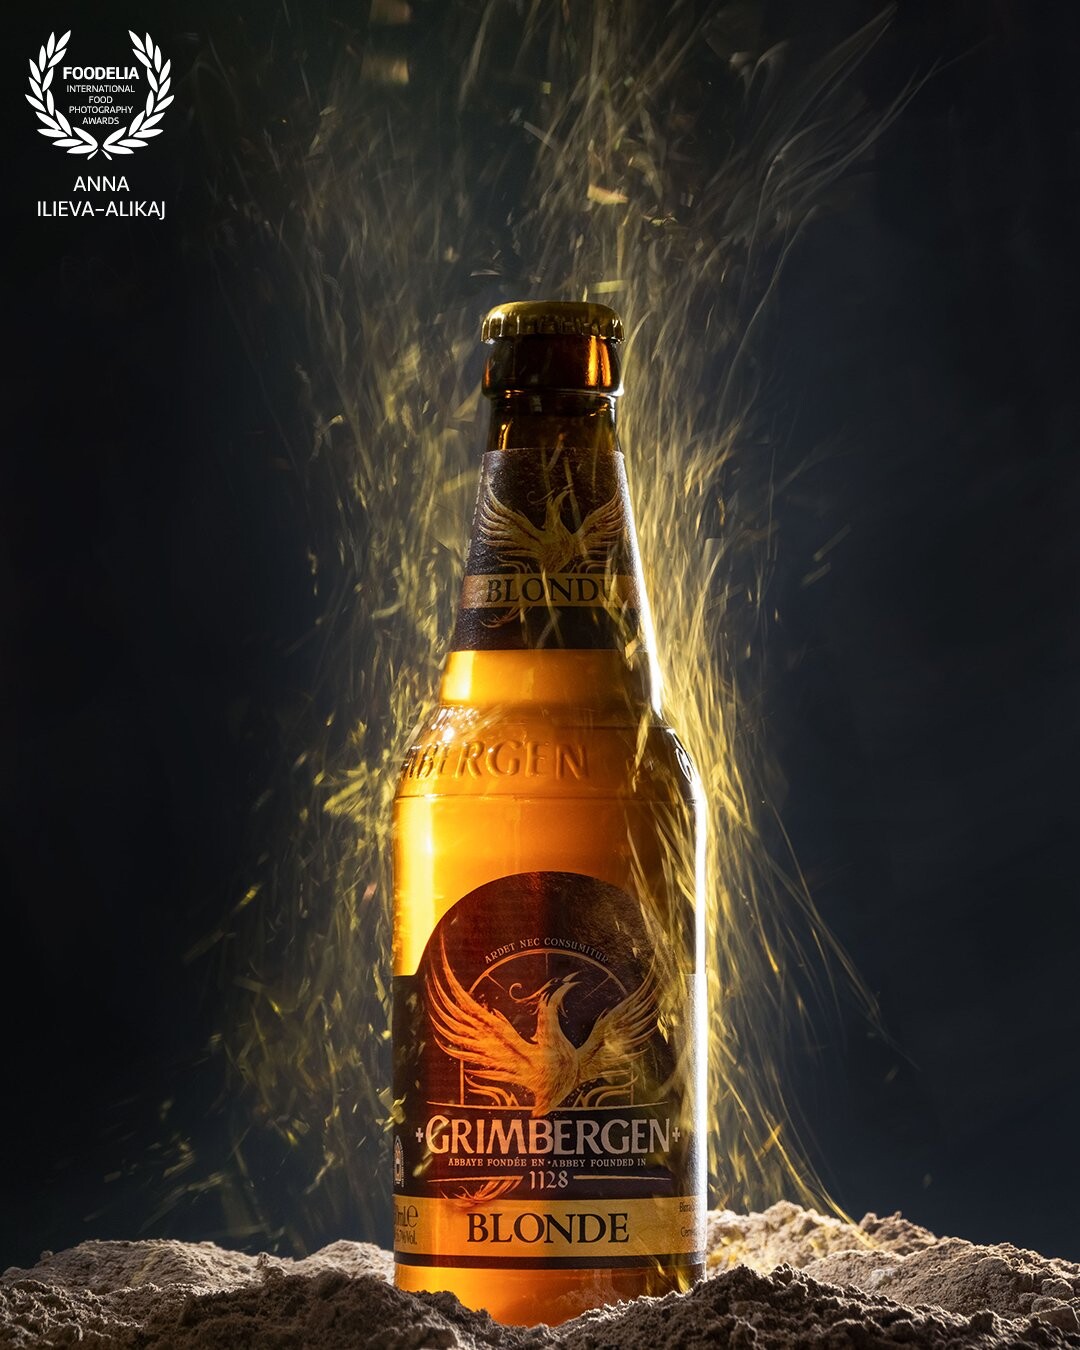 The story of the Phoenix has inspired many people (including me ;) to believe in themselves and to find strength within themselves especially when going through a difficult period in their lives. So when I saw the beautiful label of this beer, which by the way has excellent taste, I already knew how I would like to take this shot. The rest of the story is absolutely technical - real ash, one light source and a reflector. Two images combined in one.